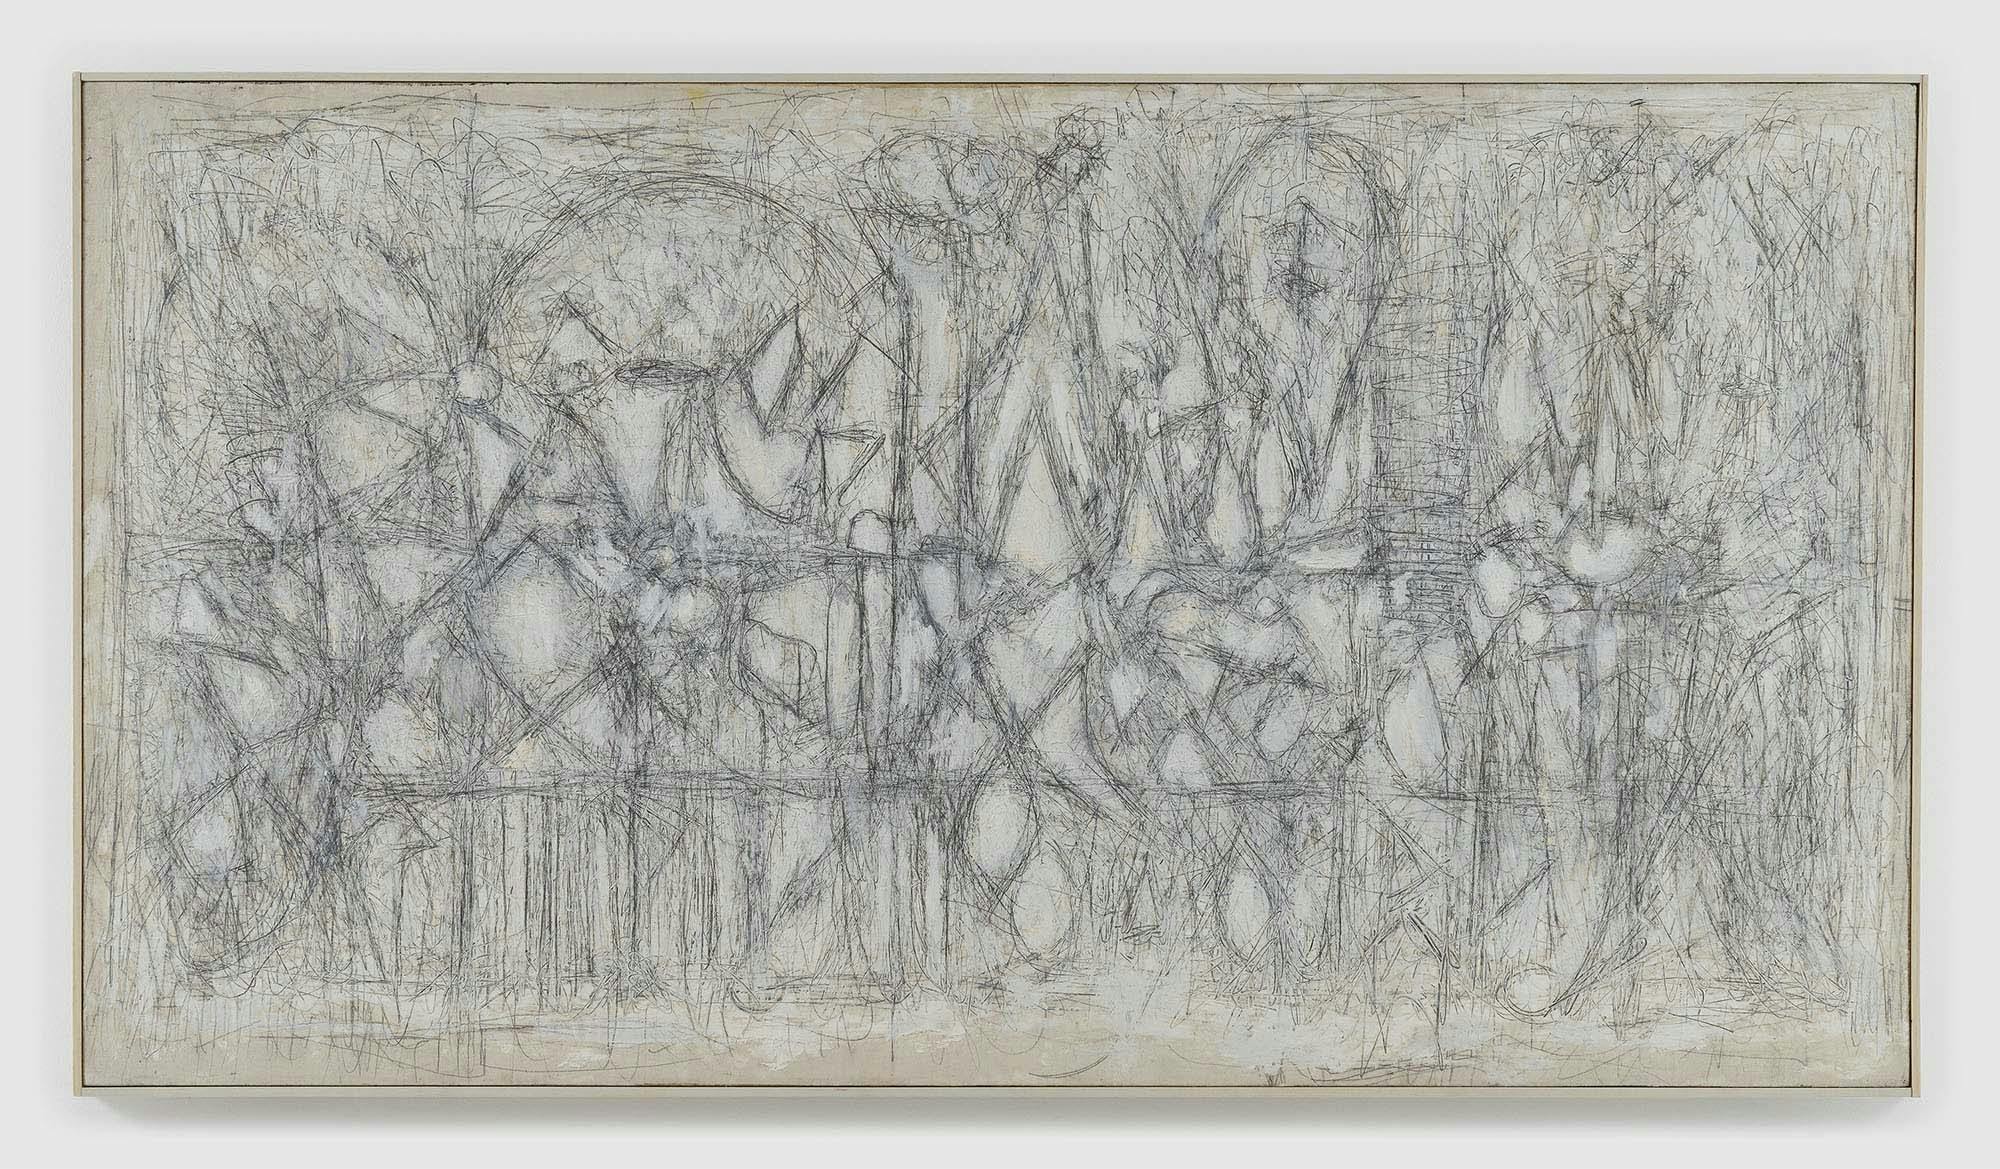 White Garden, Number 3 
1950
Oil and graphite on linen
27 1/8 x 49 1/2 in. (68.9 x 125.7 cm)
 – The Richard Pousette-Dart Foundation